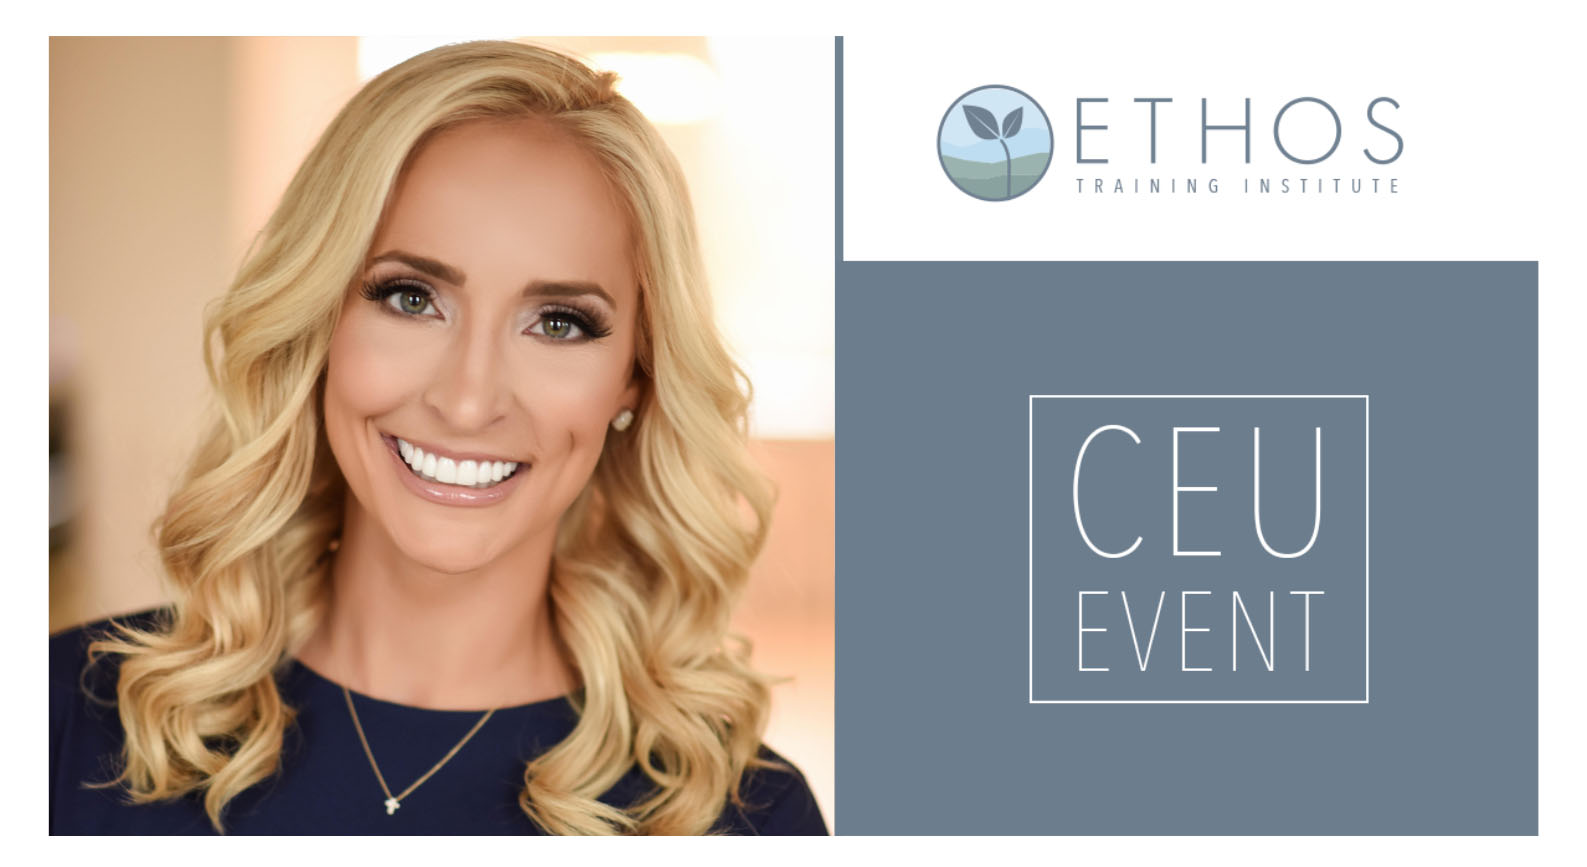 Ethos Institute's Thought Leadership Training Series event, presented by Elizabeth Mclngvale